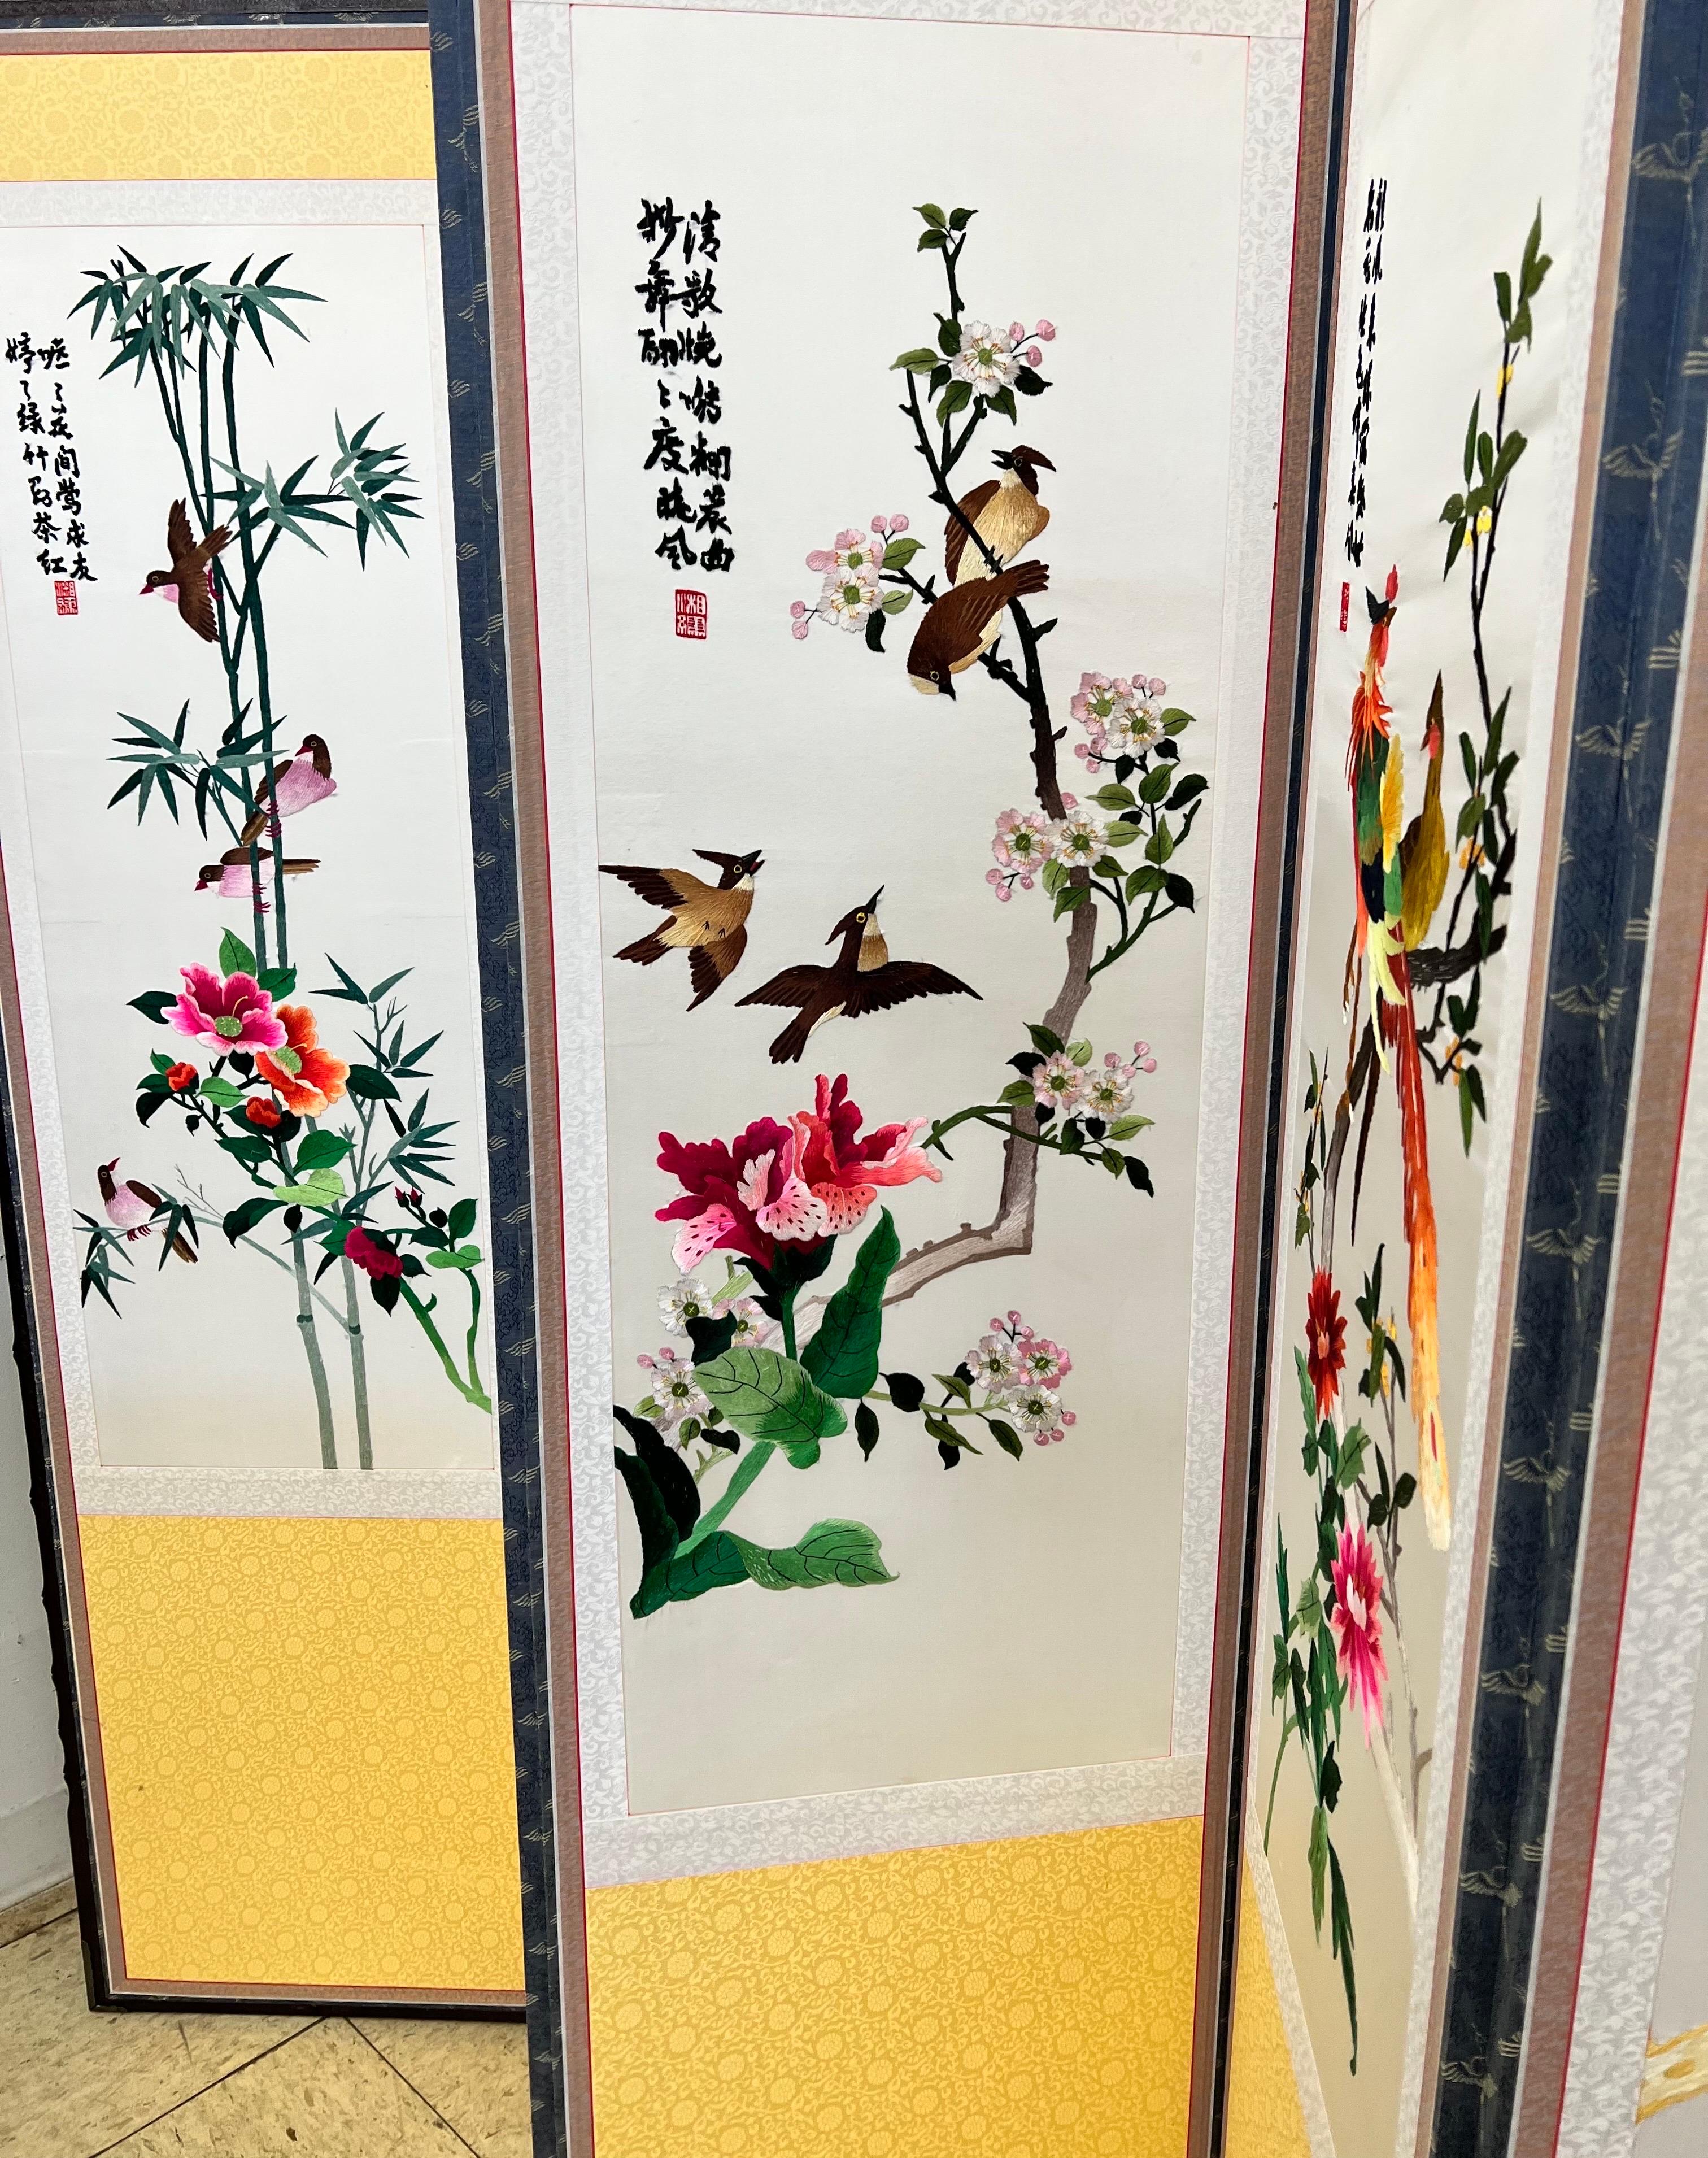 Chinese Export Exquisite Chinese Embroidered Silk 8 Panel Room Divider Screen of Birds, Flowers